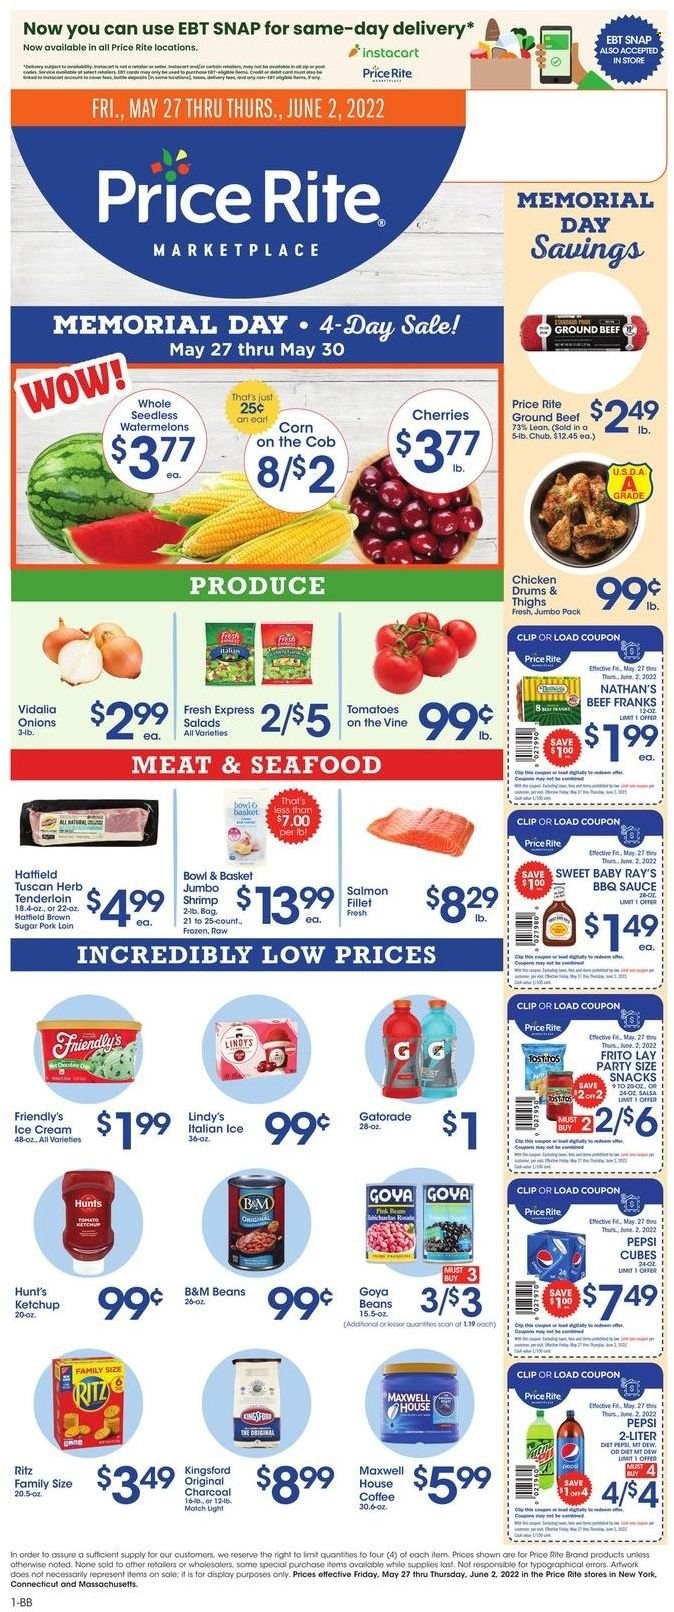 thumbnail - Price Rite Flyer - 05/27/2022 - 06/02/2022 - Sales products - Bowl & Basket, corn, tomatoes, onion, cherries, salmon, seafood, shrimps, sauce, ice cream, Friendly's Ice Cream, RITZ, Tostitos, cane sugar, Goya, BBQ sauce, ketchup, salsa, Pepsi, Gatorade, Maxwell House, coffee, beef meat, ground beef, pork loin, pork meat. Page 1.